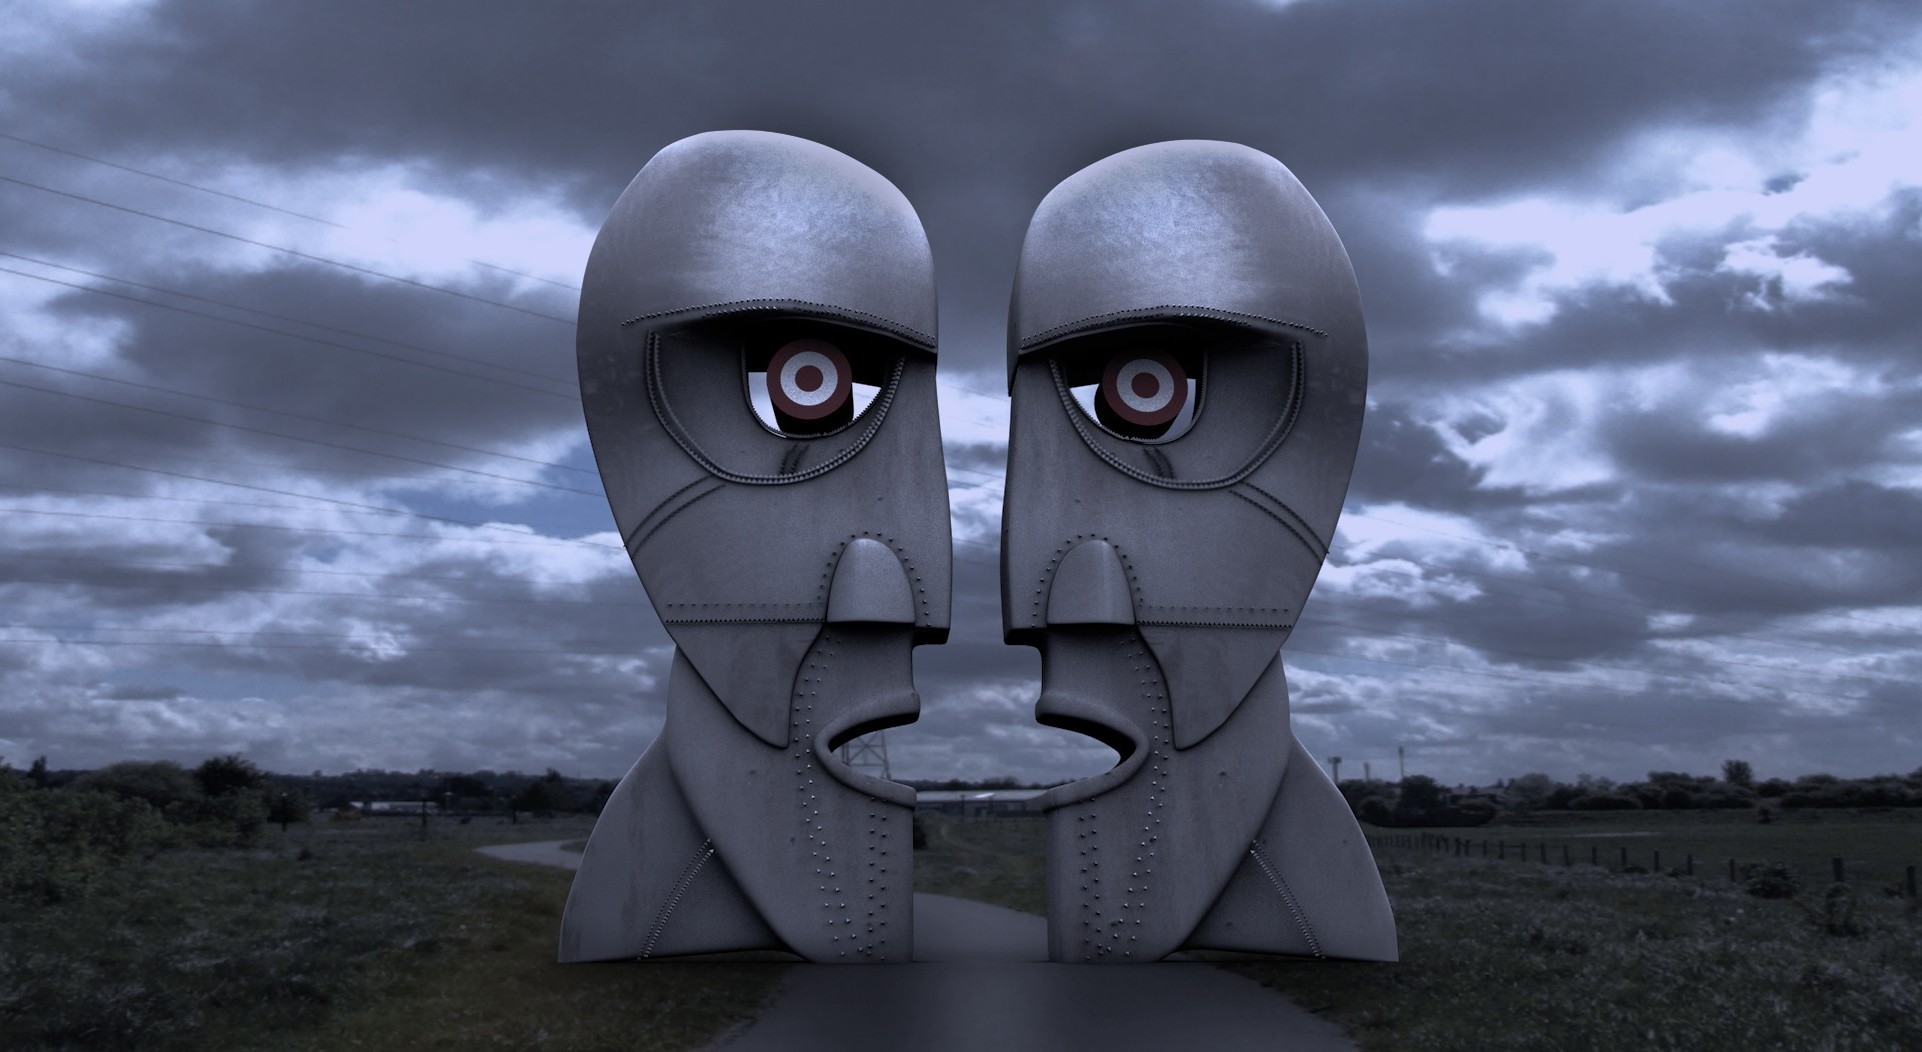 Pink Floyd, The Division Bell, Sculpture, Metal, Symmetry, Nature, Road, Field, Trees, Clouds, Evening, Artwork Wallpaper